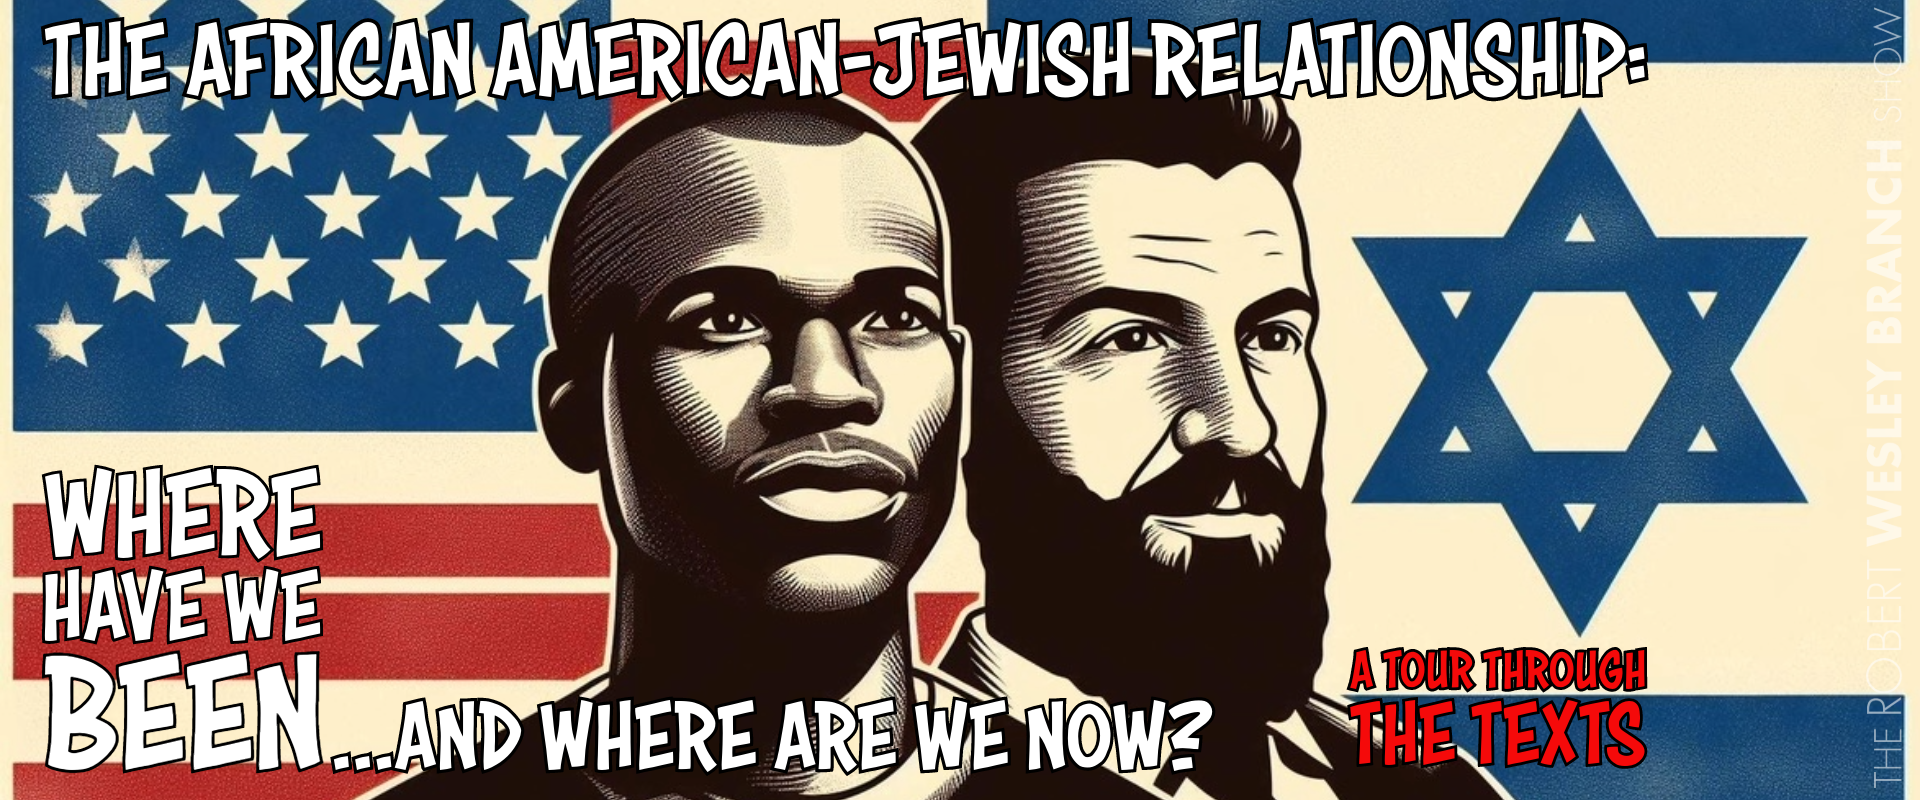 Permalink to: The African American-Jewish Relationship: Where  Have We Been…and Where Are We Now?